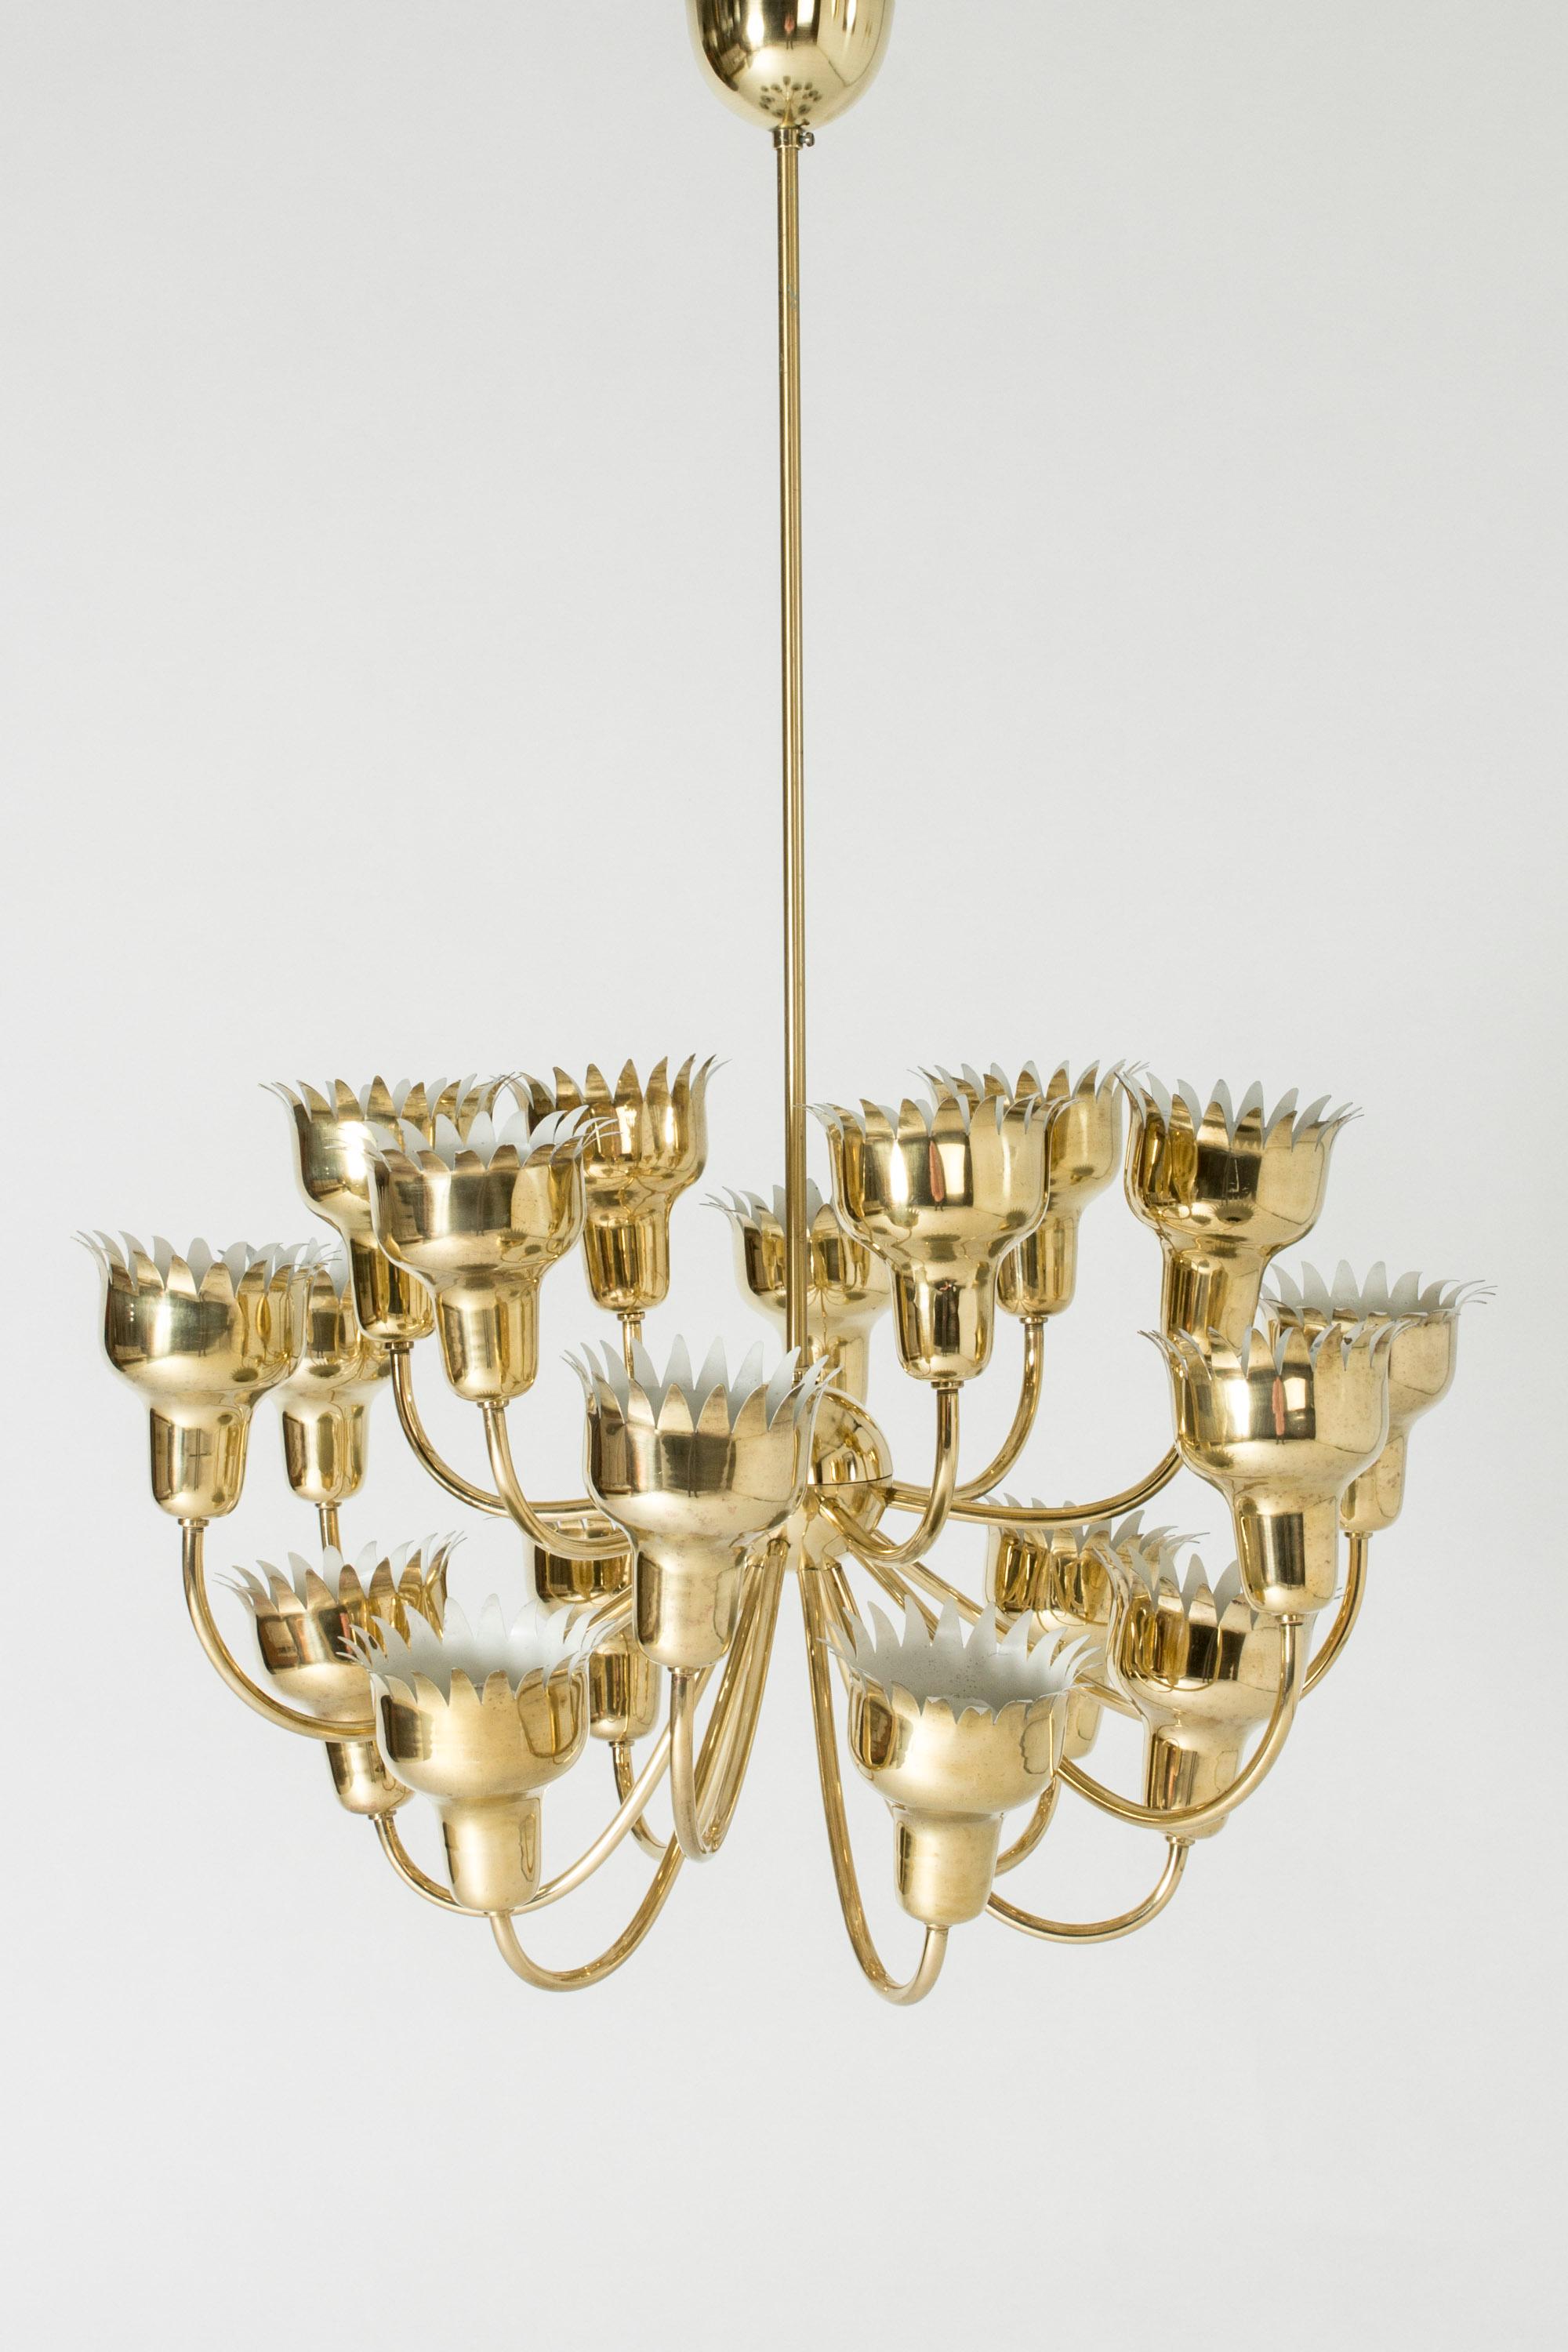 Stunning brass chandelier by Hans Bergström. Eighteen arms abundantly extending upwards holding cups with zigzag edges, like flowers opening to the light.